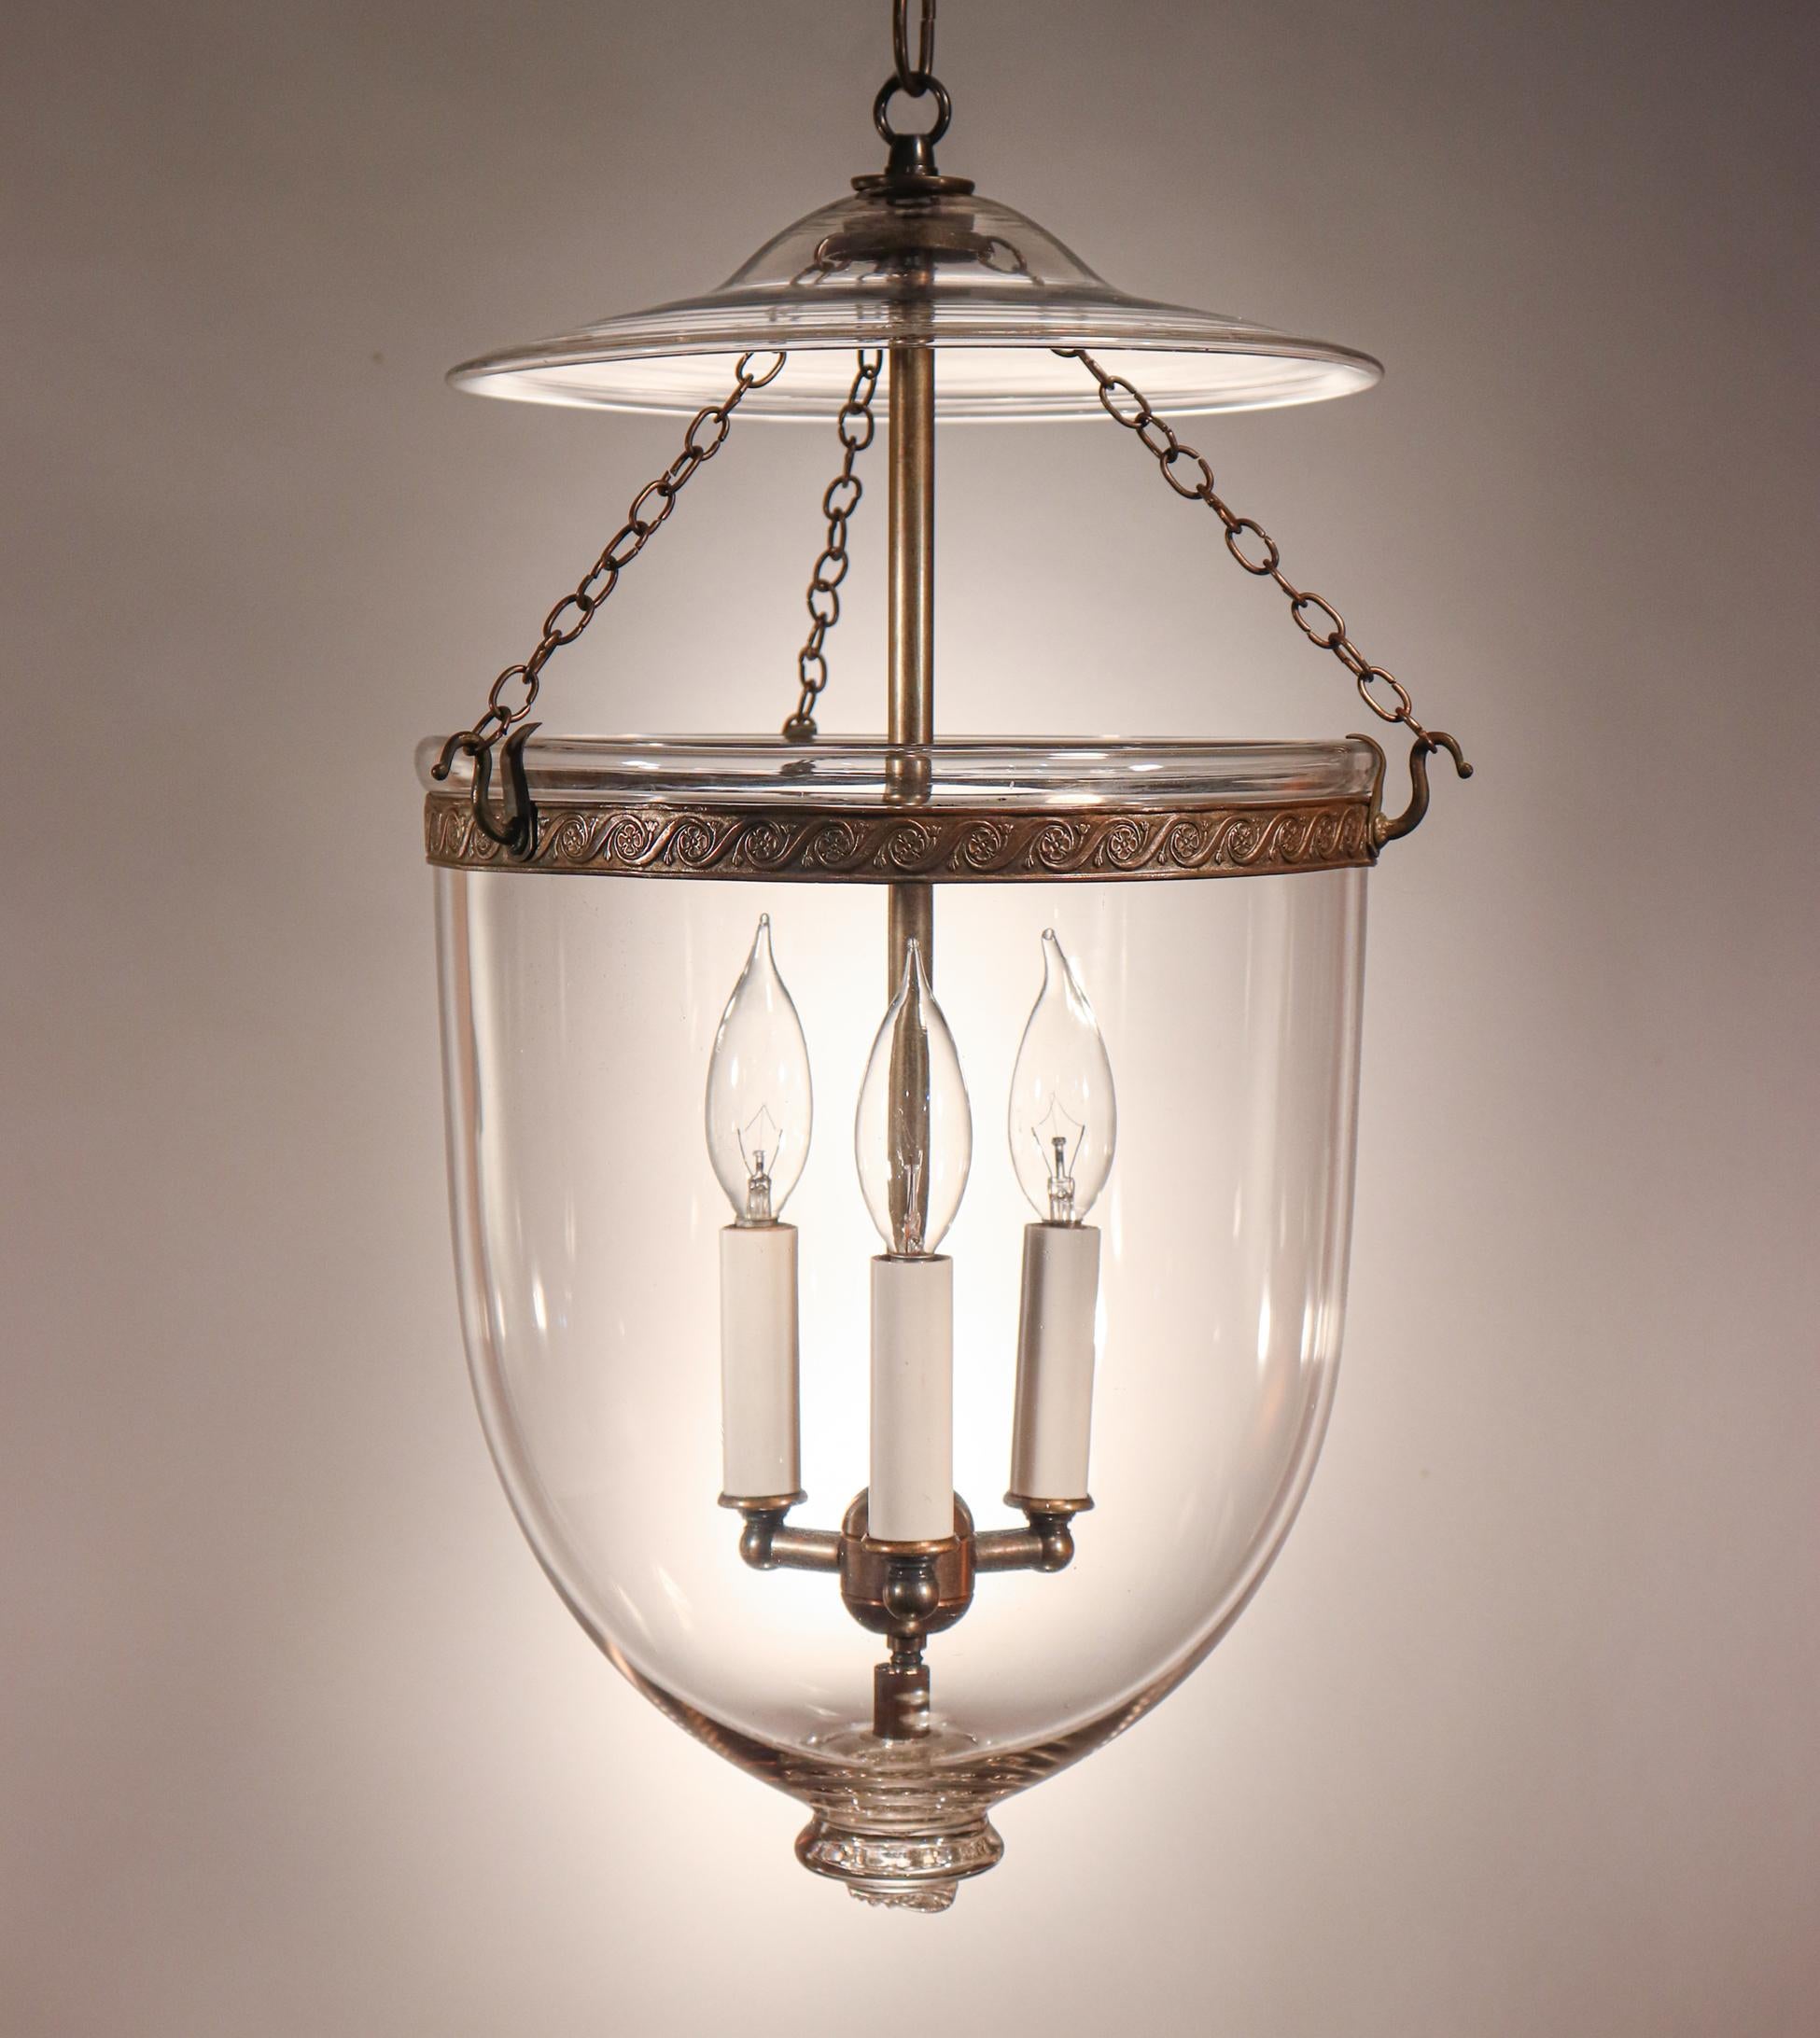 An antique bell jar lantern from England with excellent quality hand blown glass and attractive form. This circa 1870 lantern also has its original brass band with an embossed floral motif. It has been newly electrified with a three-bulb candelabra